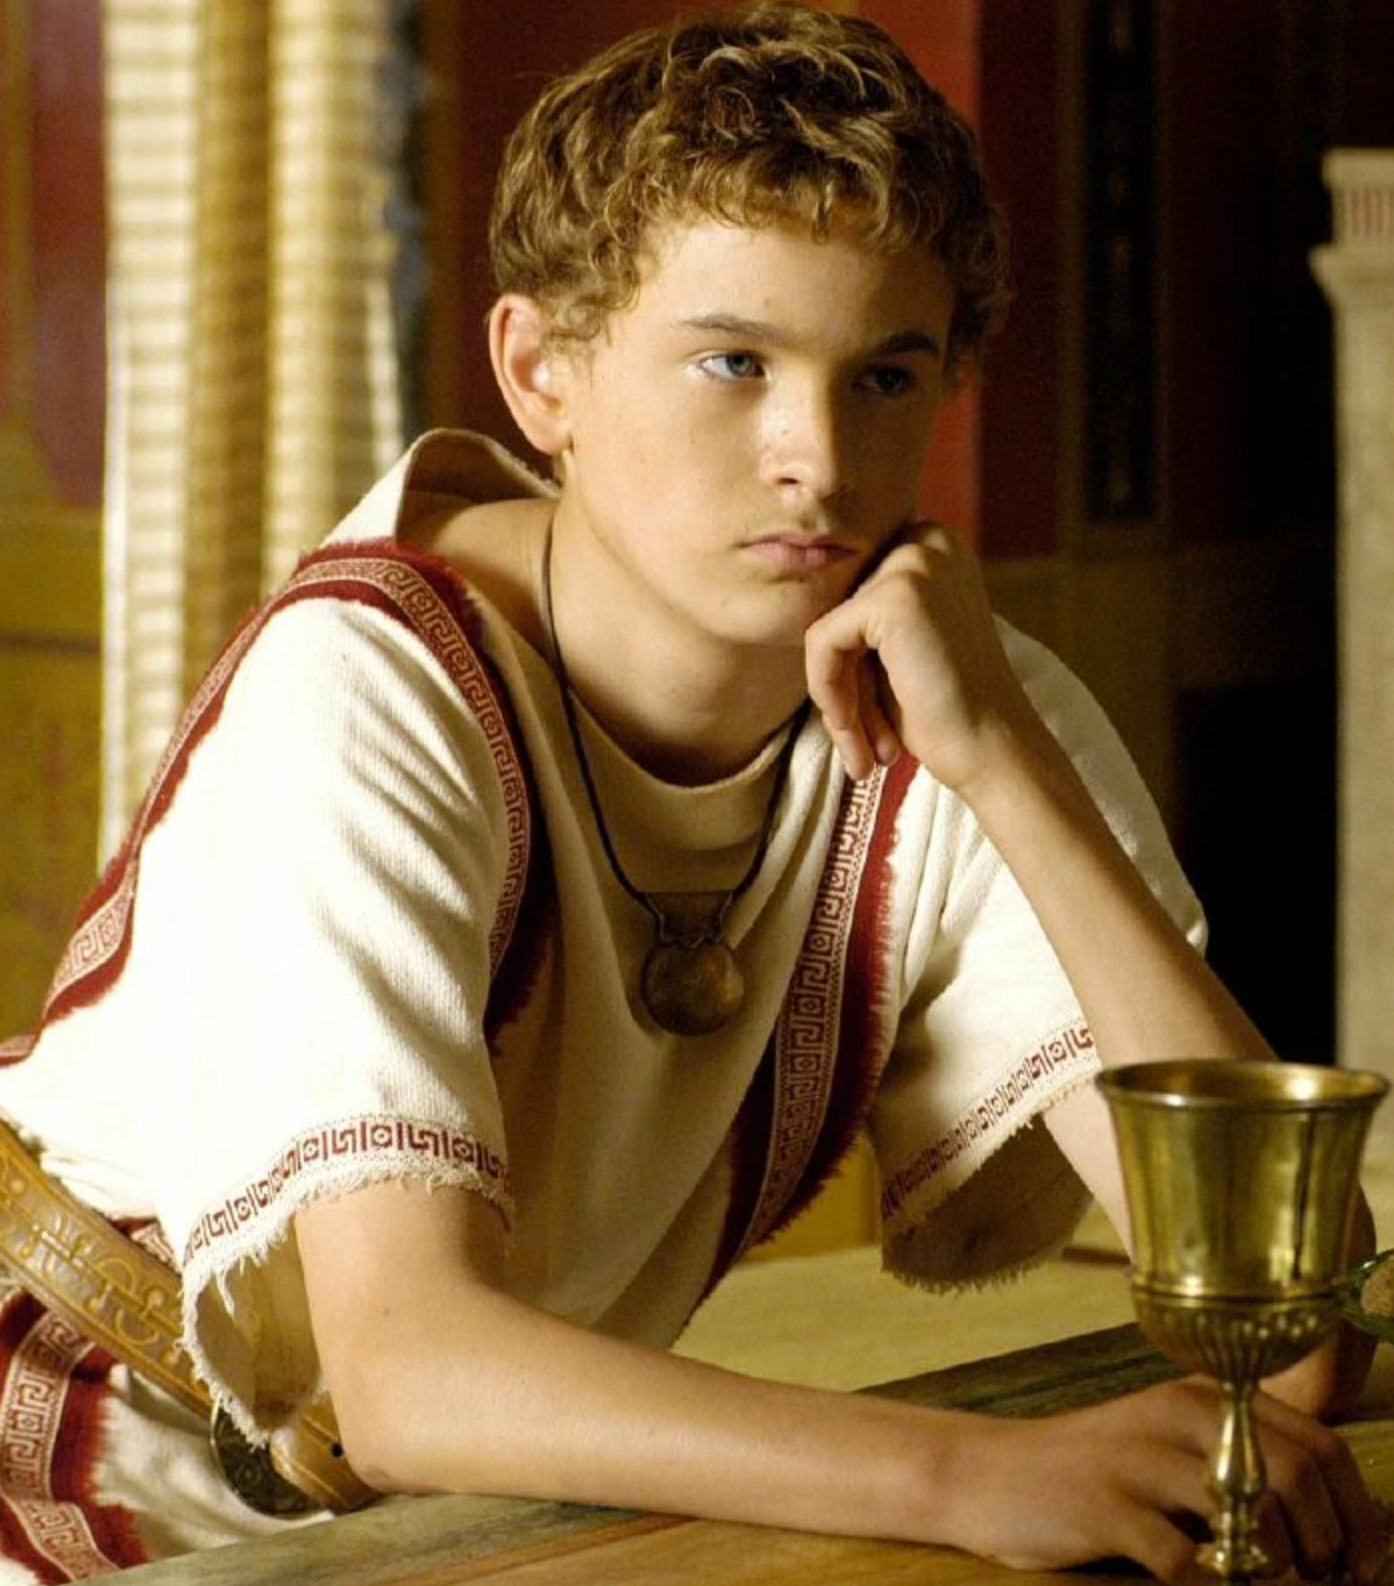 A young Gaius Octavian Caesar wearing a toga praetexta (the toga of boys) and his bulla. Rome, HBO (2005-2007).